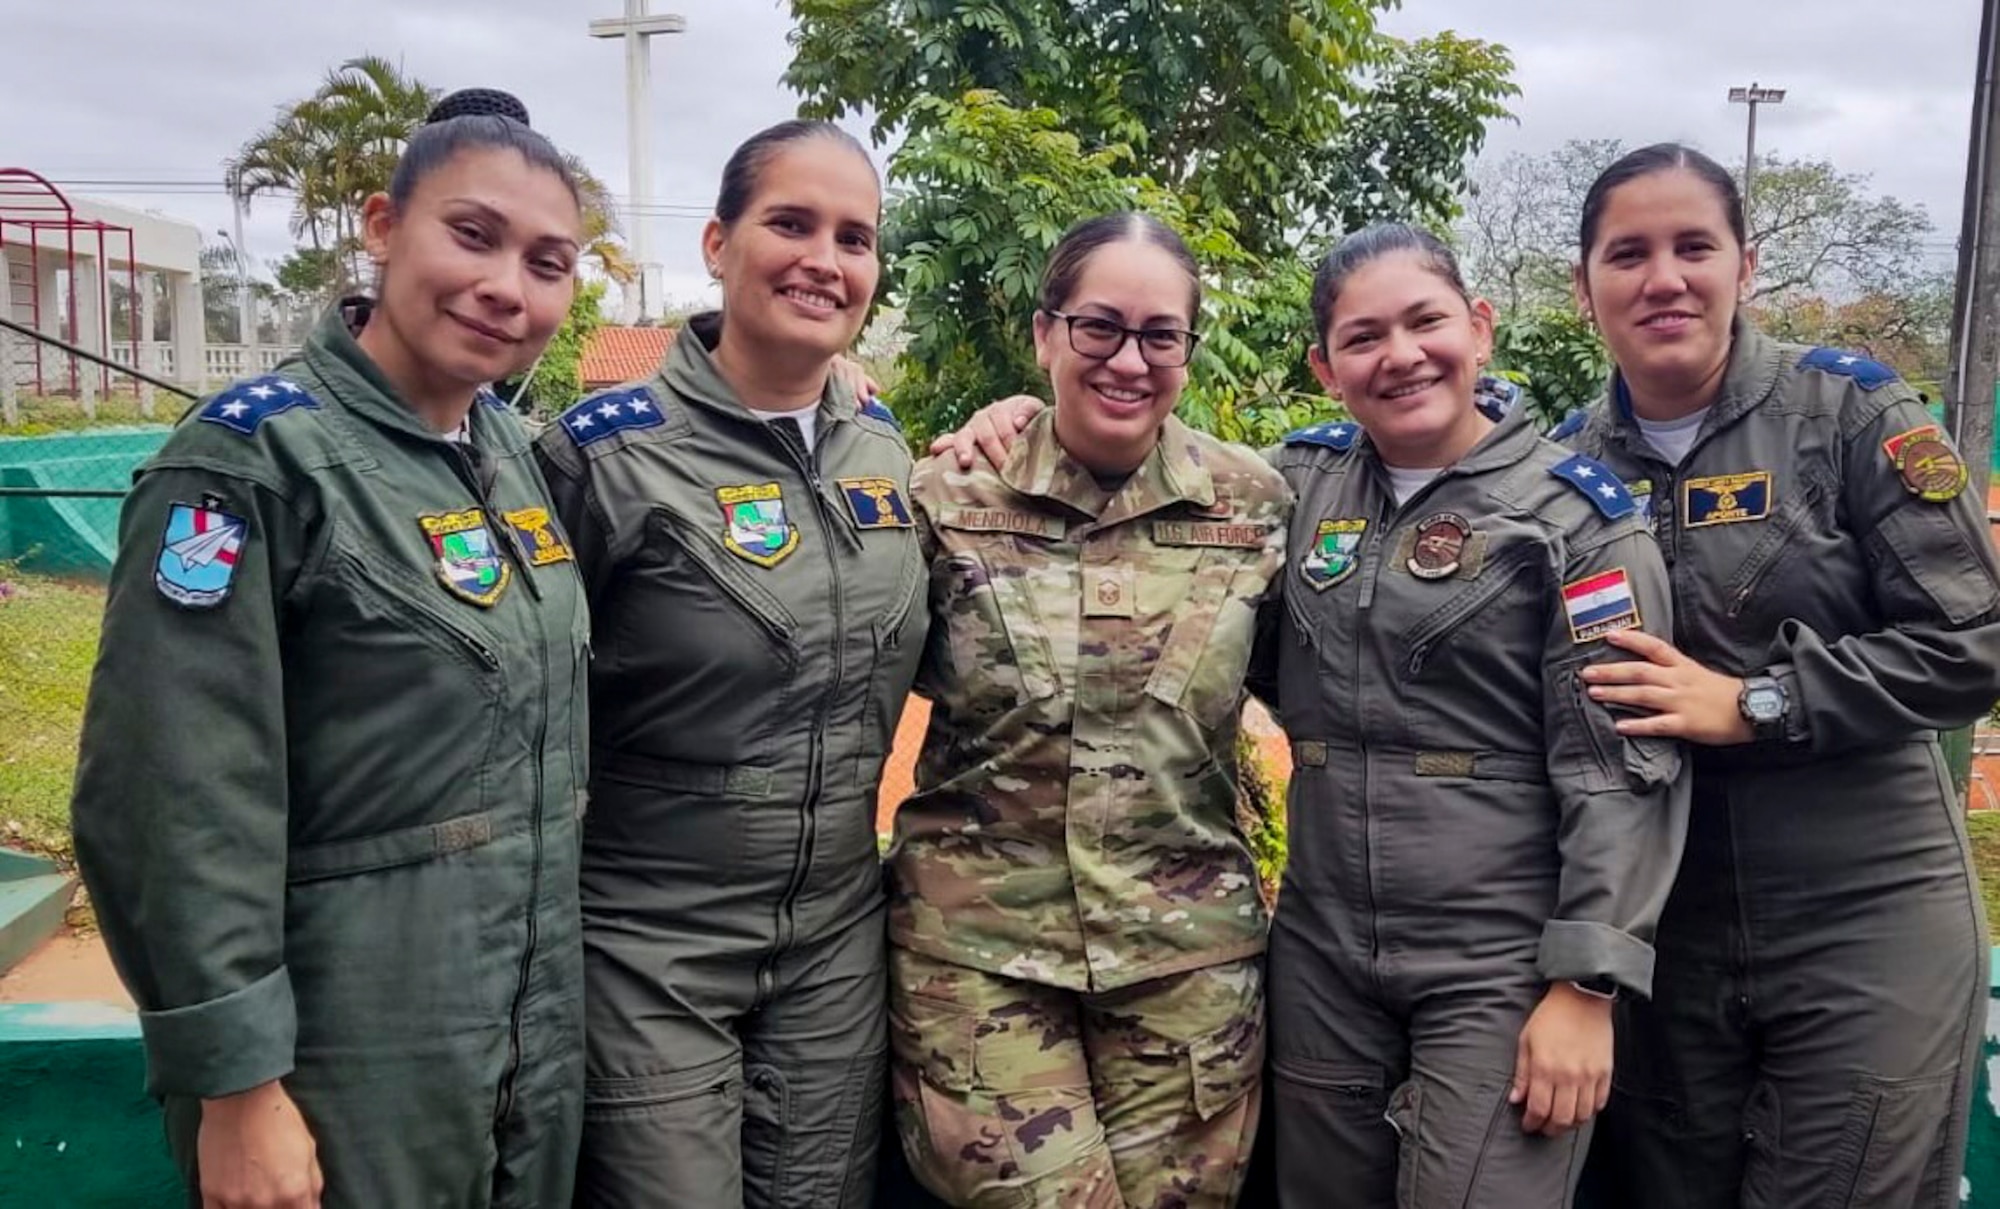 U.S. Air Force Master Sgt. Ana Mendiola, middle, the 571st Mobility Support Advisory Squadron (MSAS) training flight chief, pauses for a photo with four Paraguayan military service members, Sept. 29, 2022 in Paraguay. The 571st MSAS visited Paraguay to train their Air Force and build partnership capacity. During their visit, the first flight between the two Air Force units was operated and completed solely by an all-female aircrew and led by a female Paraguayan pilot. (Courtesy Photo)